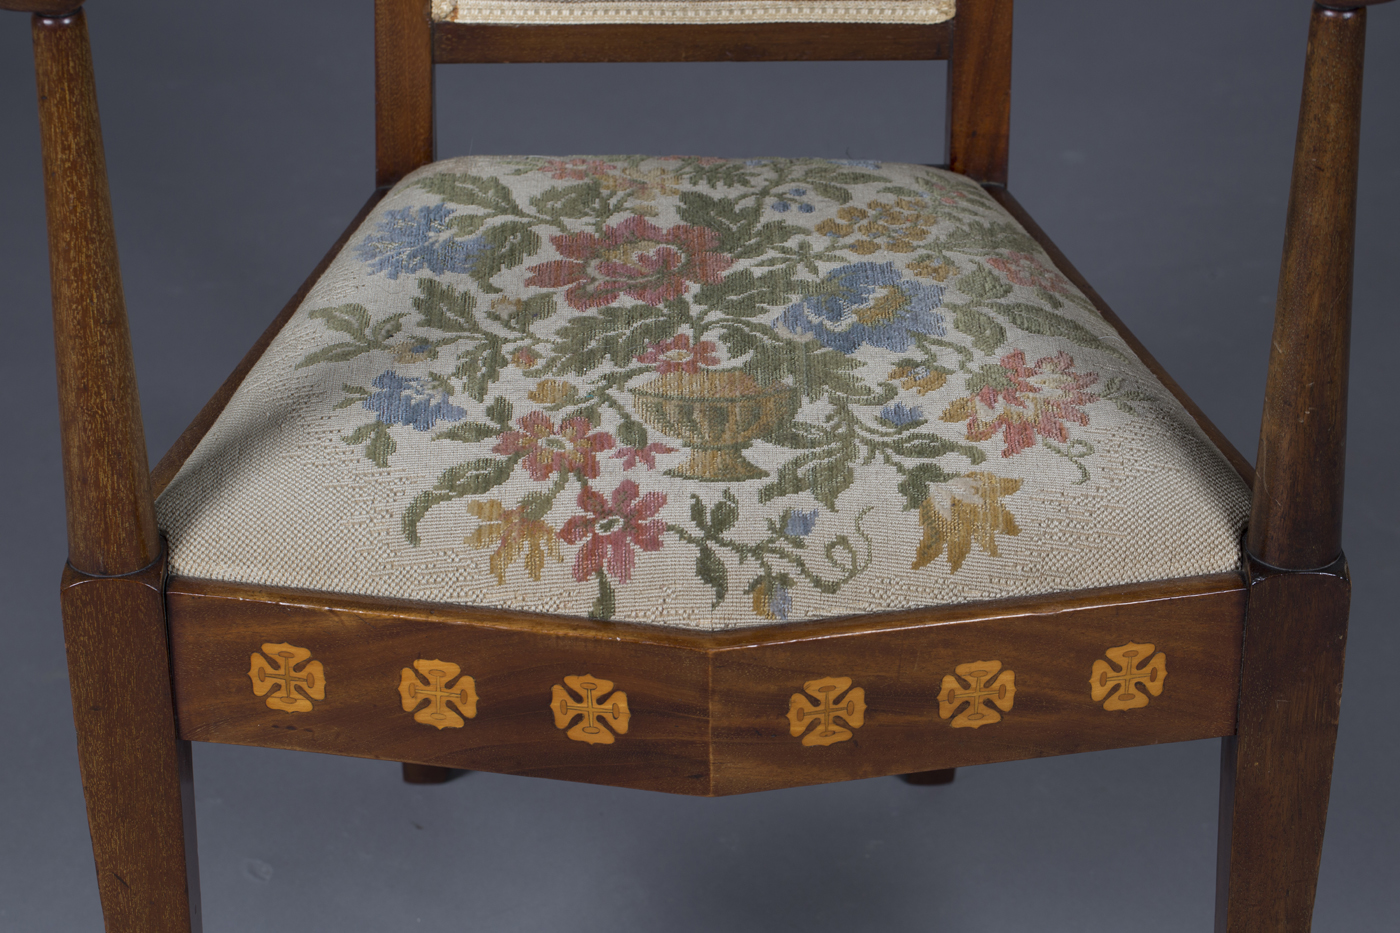 An Edwardian Arts and Crafts mahogany and foliate inlaid elbow chair, possibly by J.S. Henry, the - Image 2 of 3